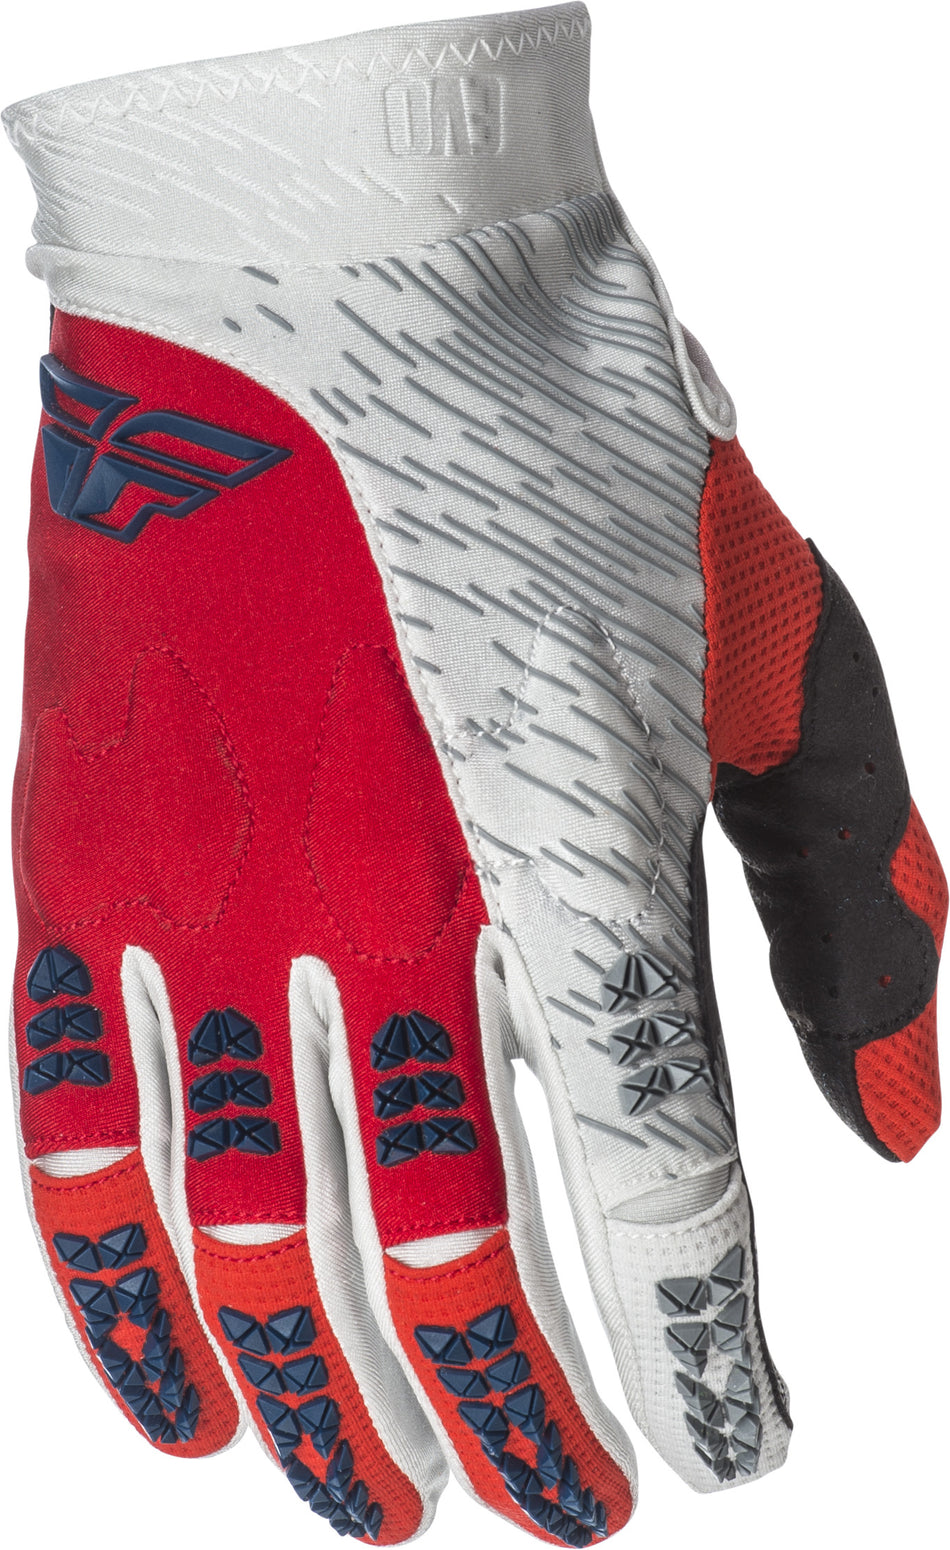 FLY RACING Evolution 2.0 Gloves Red/Grey/White Sz 8 371-11208